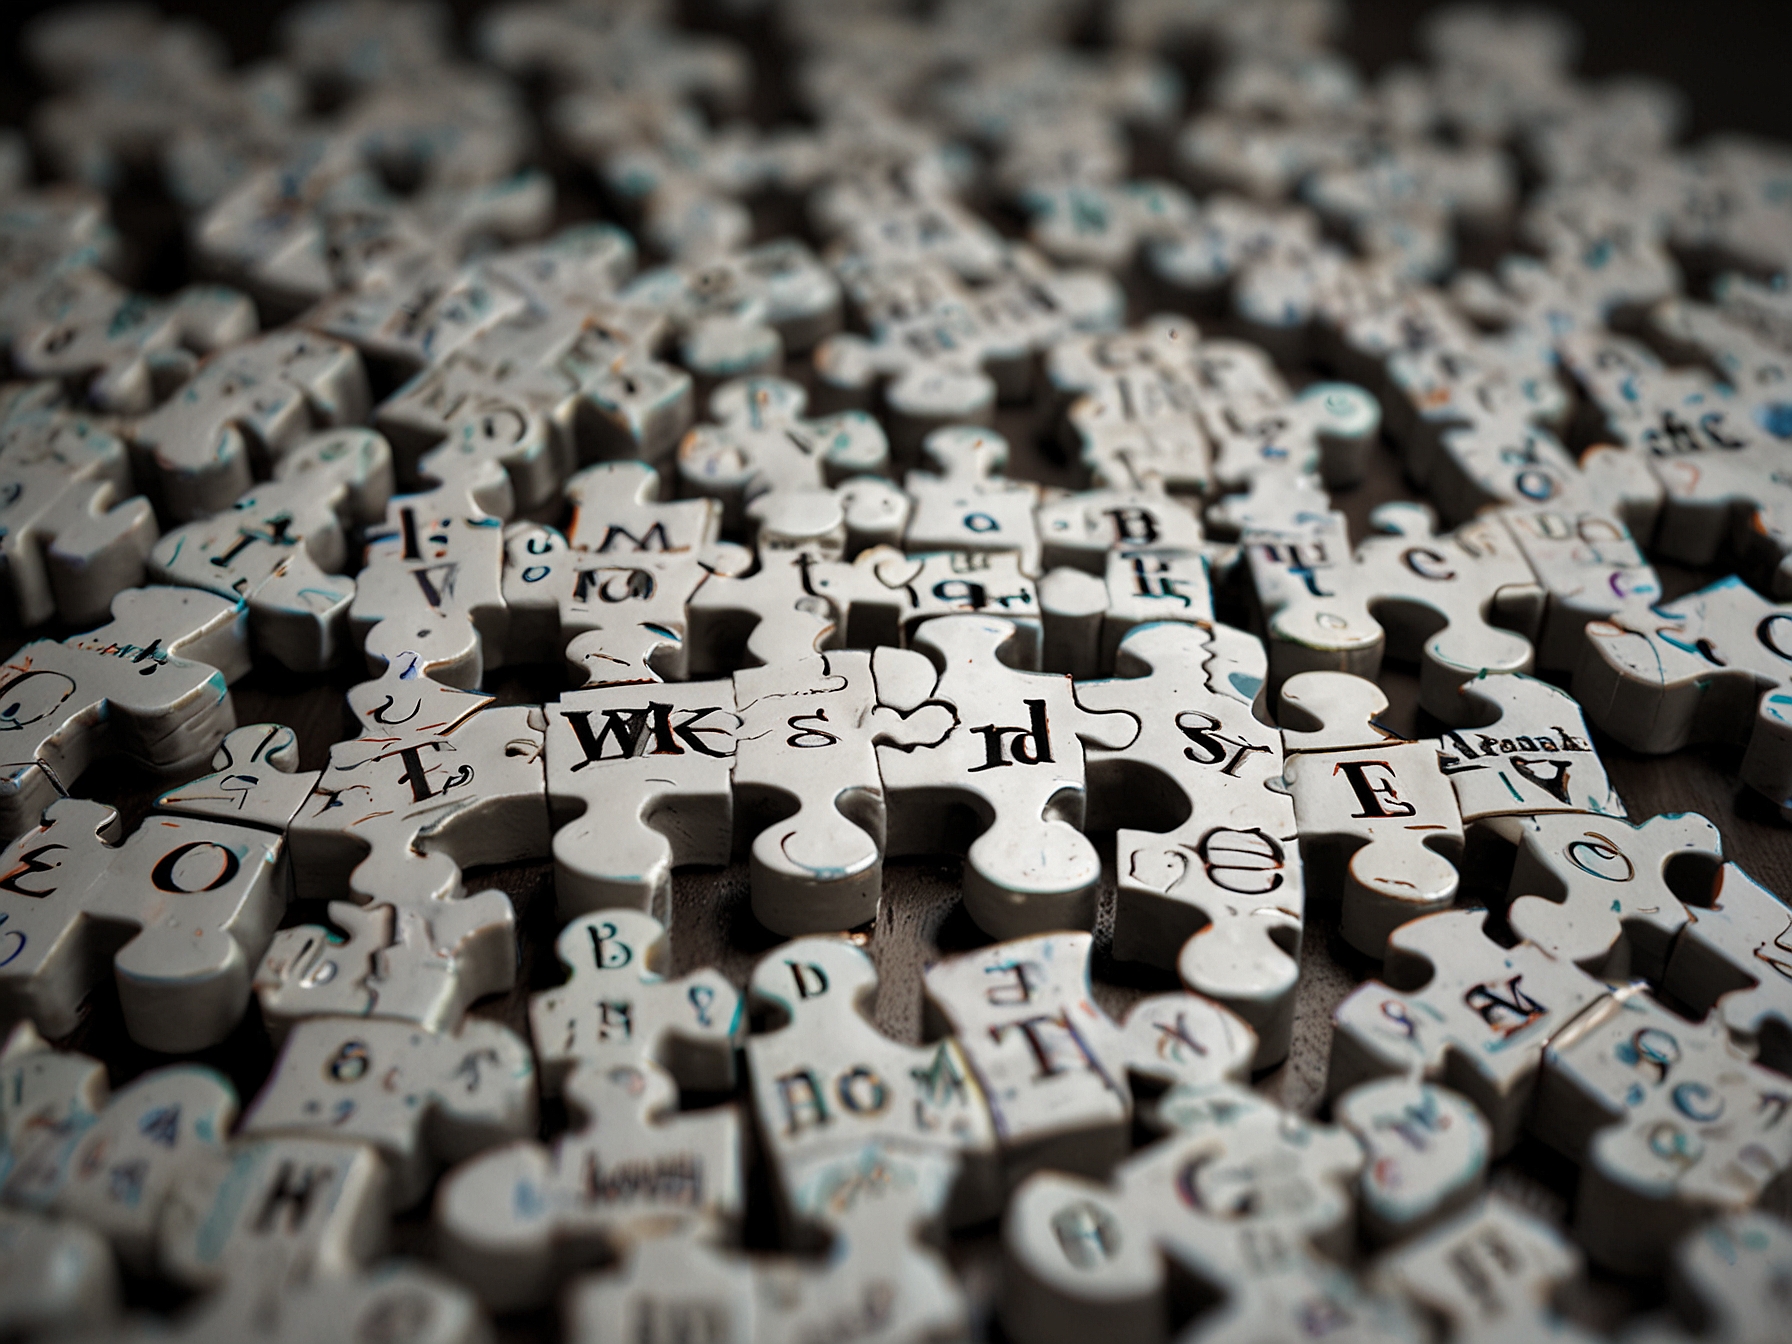 A close-up of the 'Strands' puzzle with key letters circled, demonstrating hints such as vowel clusters and consonant groups, providing visual aids to solve the puzzle more effectively.